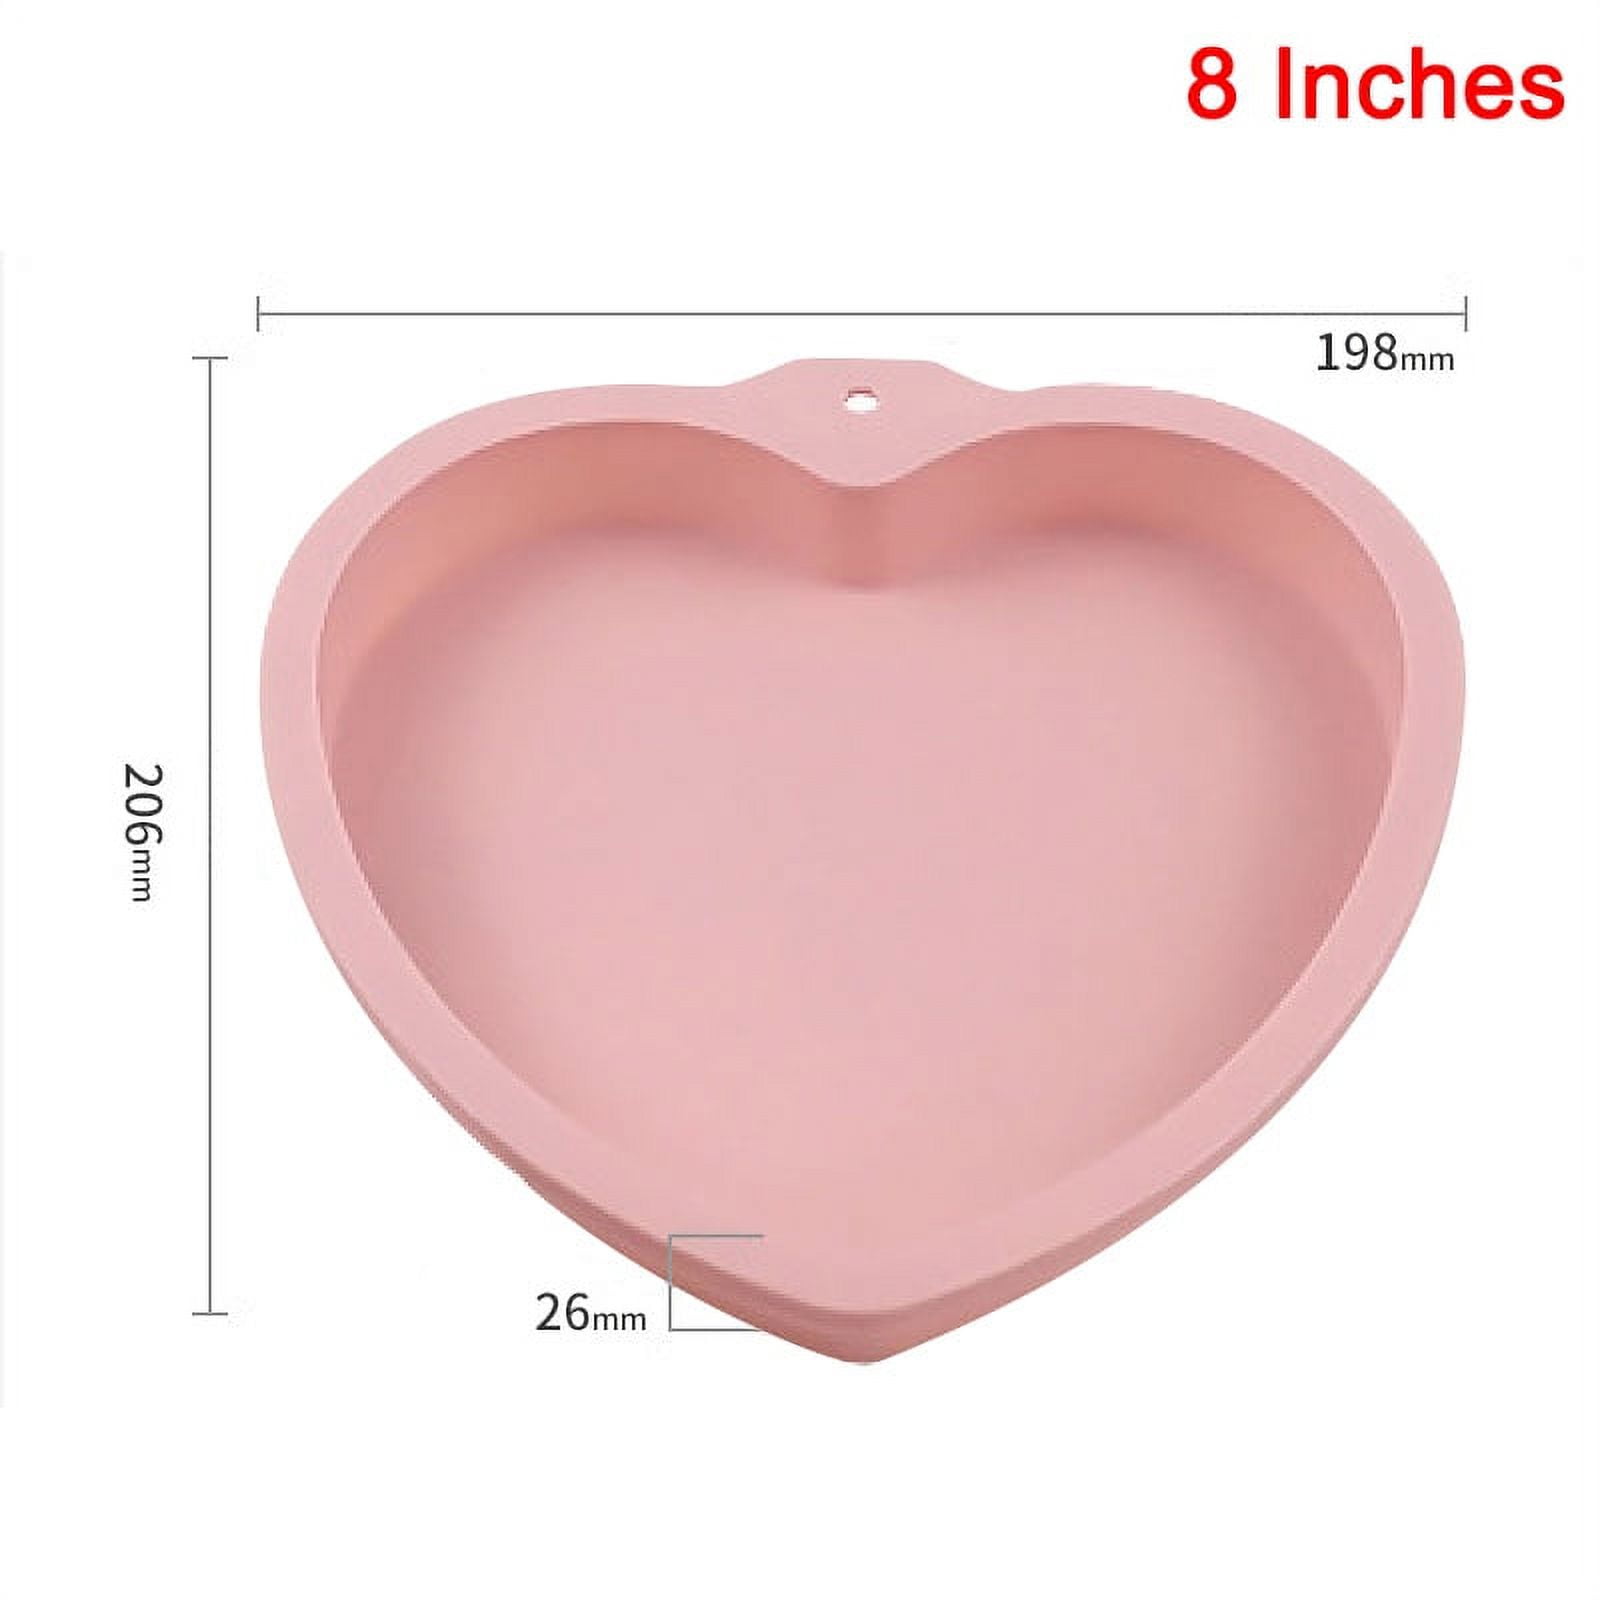 Round or Heart Shaped Silicone Cake Pan Nonstick Cake Baking Molds for Wedding Birthday Party Valentine Lake Blue Heart-Shaped 8 Inches